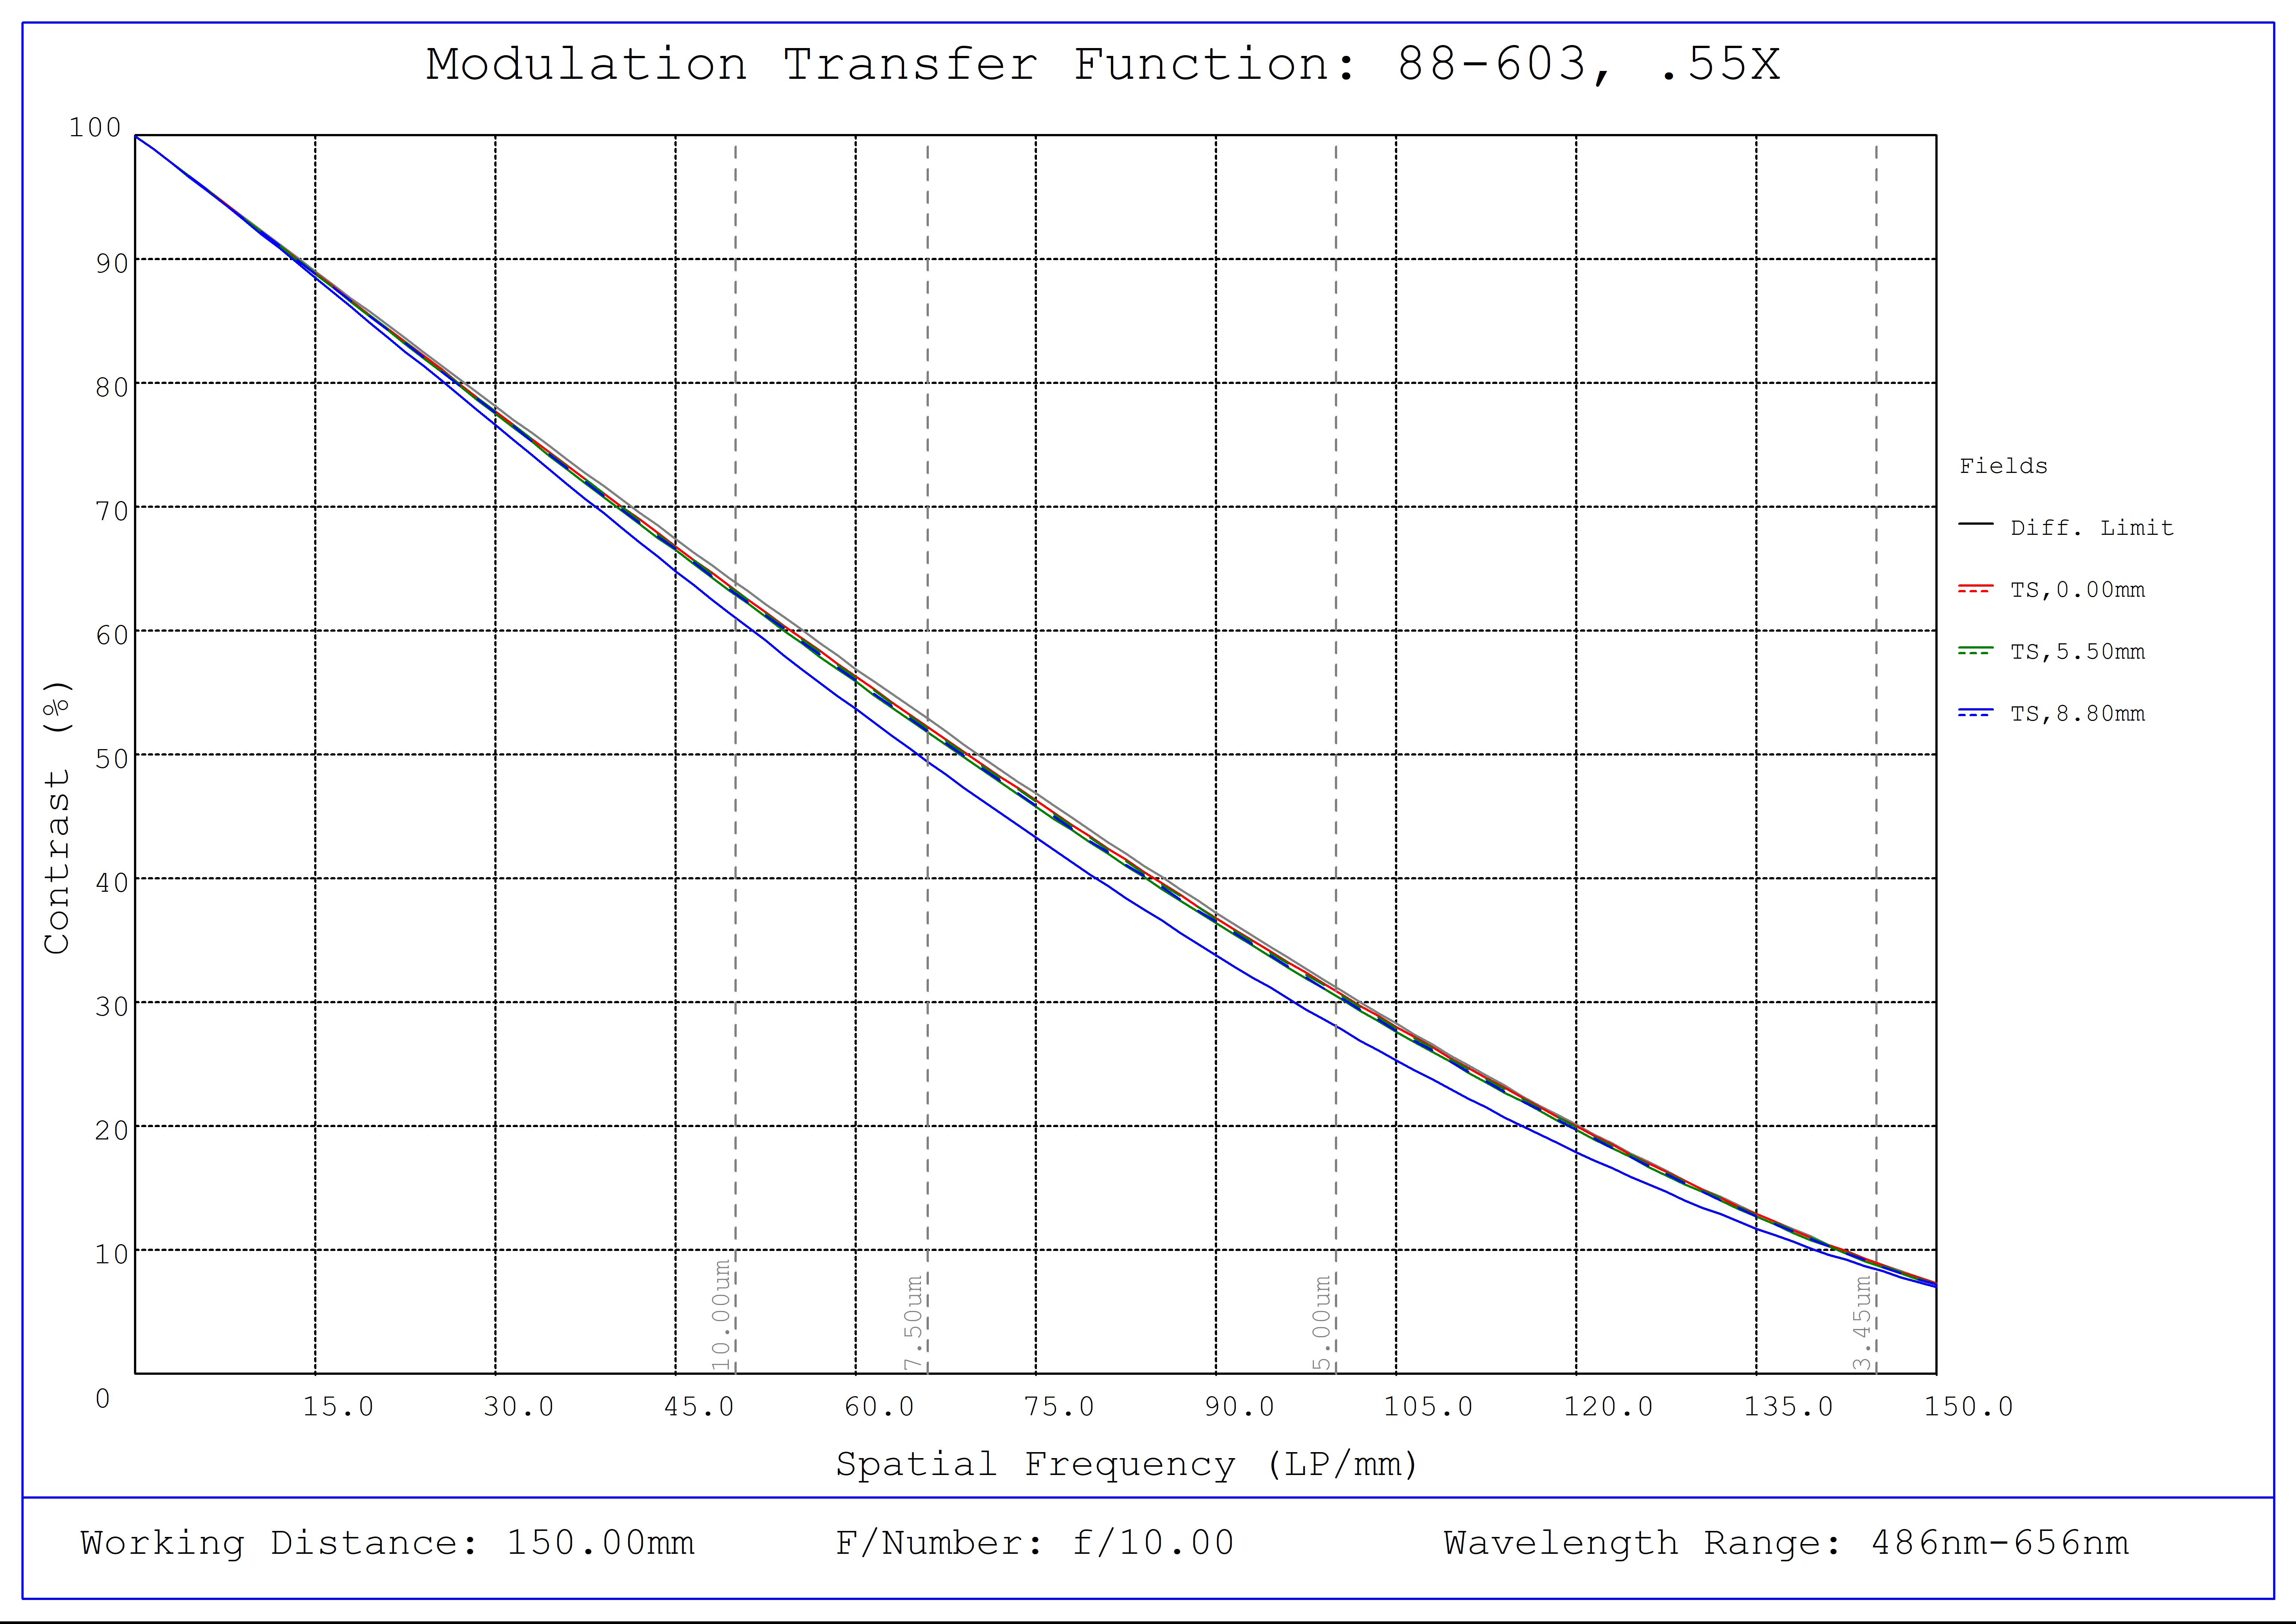 #88-603, 0.55X CobaltTL Telecentric Lens, Modulated Transfer Function (MTF) Plot, 150mm Working Distance, f10